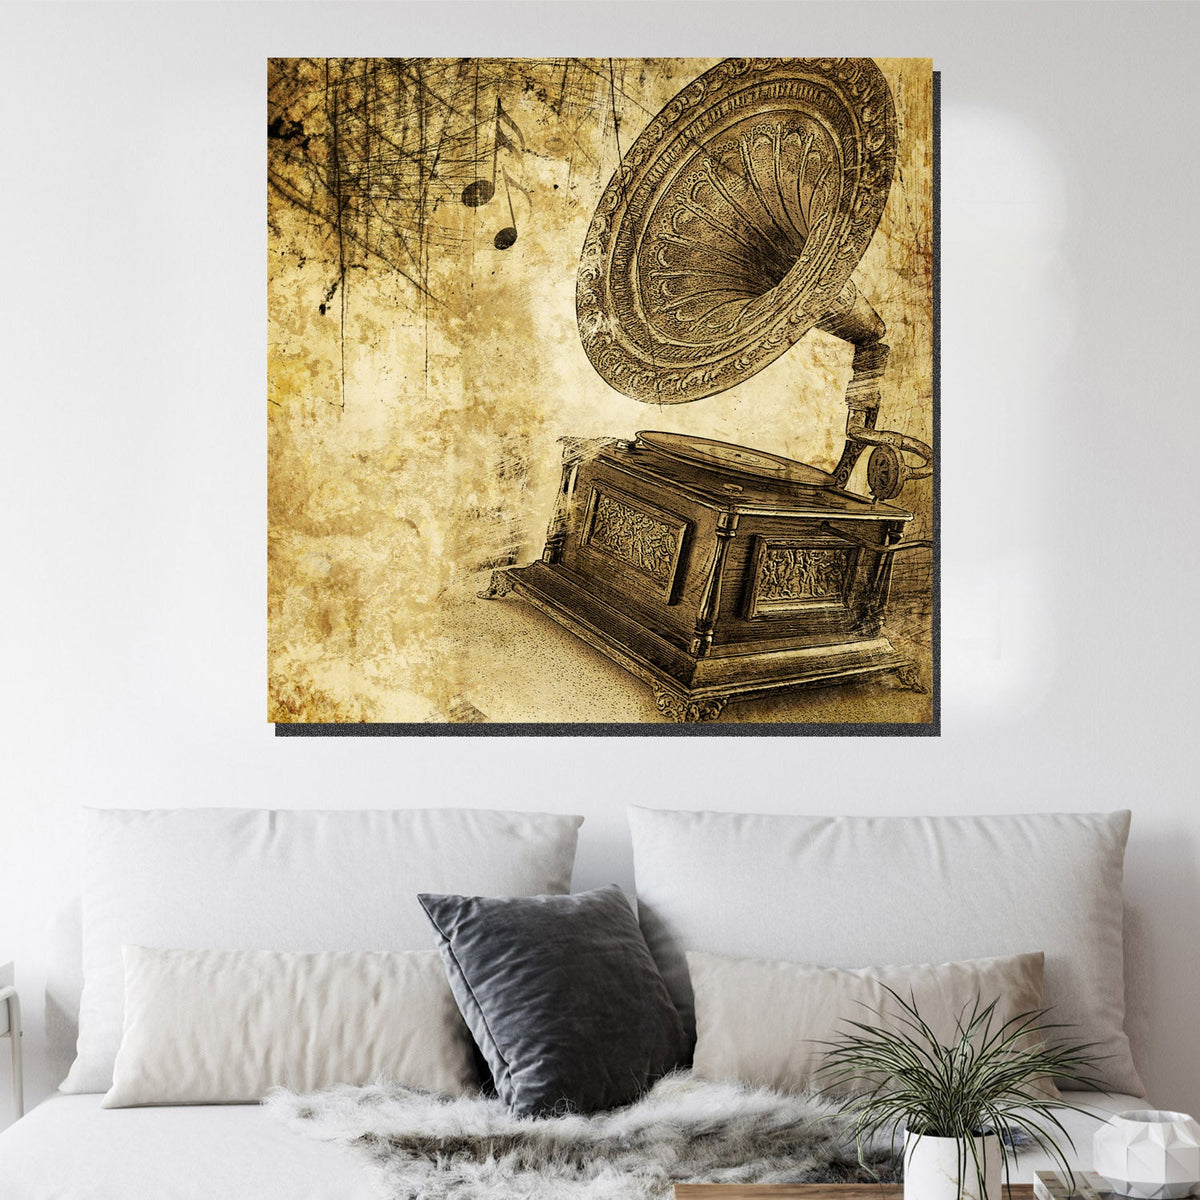 https://cdn.shopify.com/s/files/1/0387/9986/8044/products/GramophoneMusicalNoteCanvasArtprintStretched-1.jpg